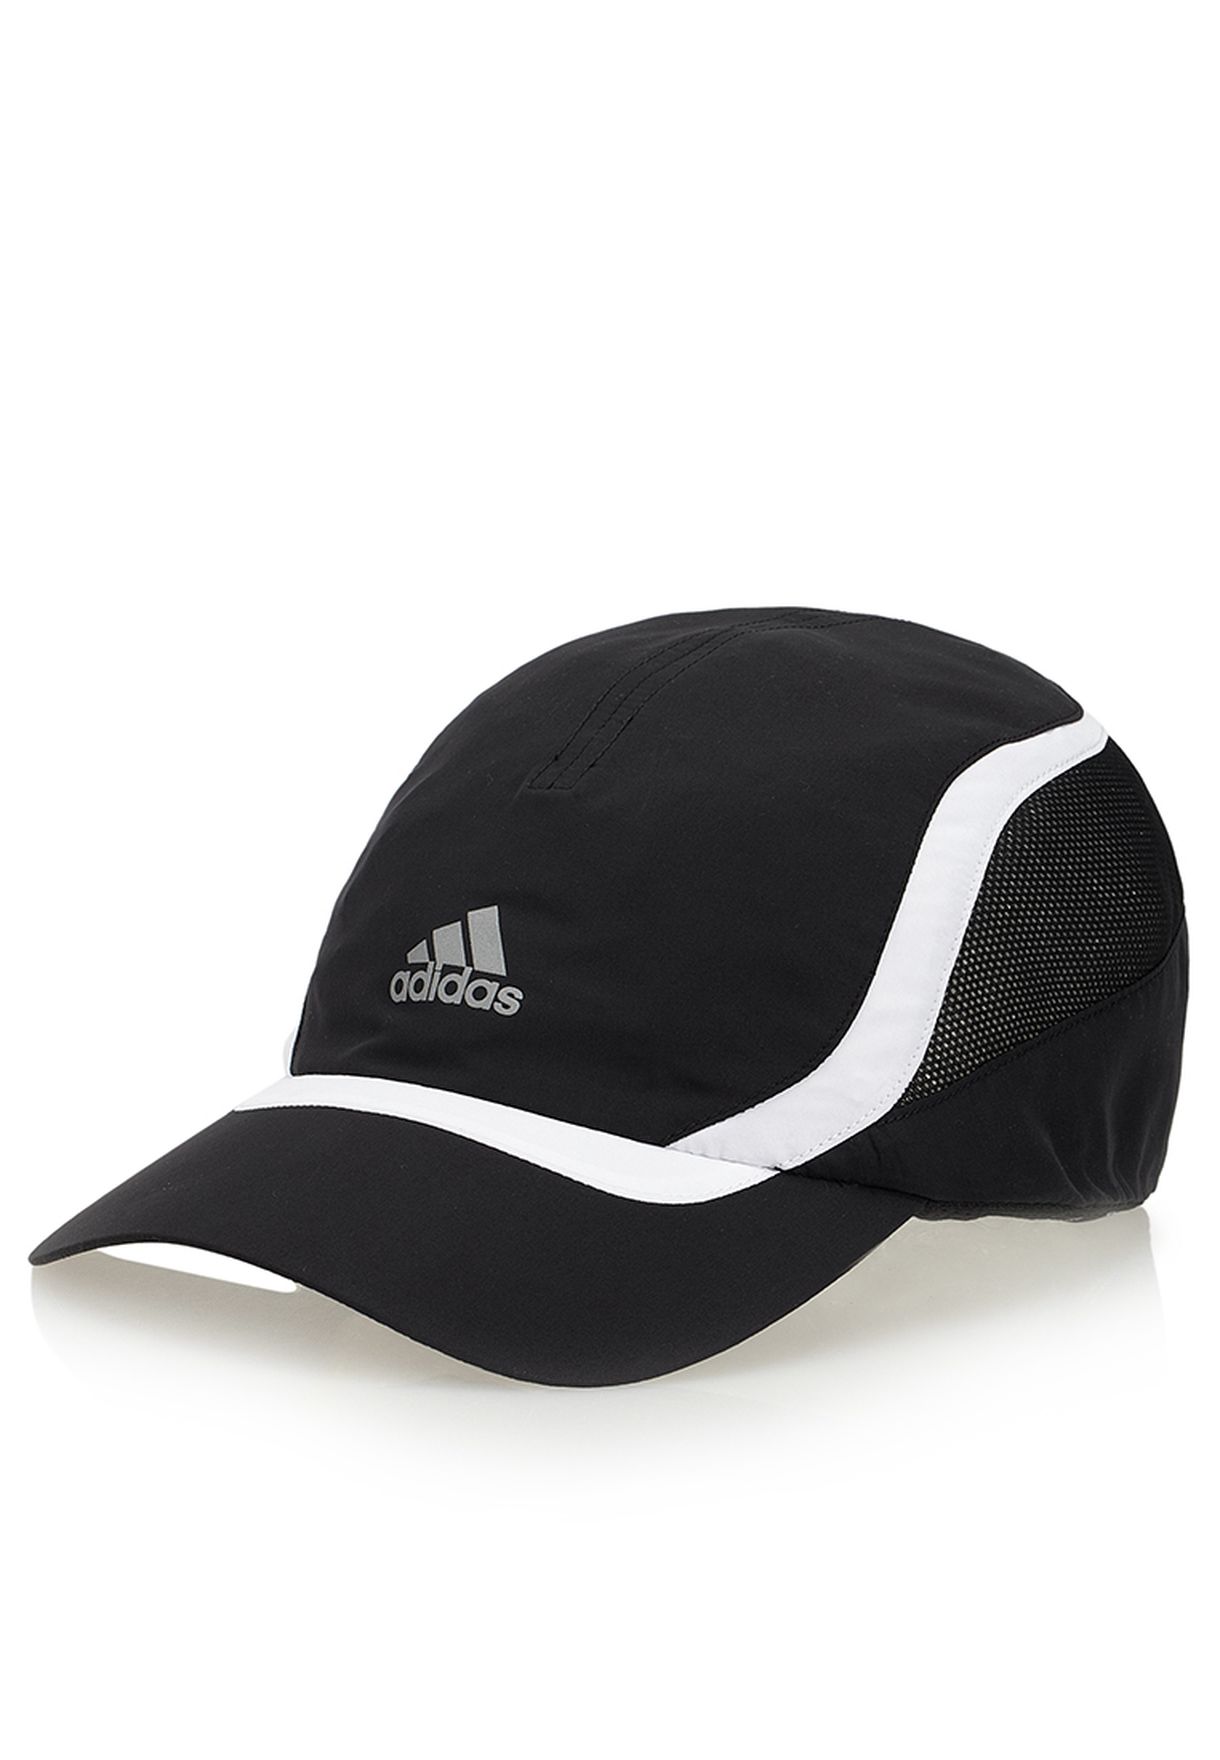 adidas black Run CC Cap in Kuwait city, other cities